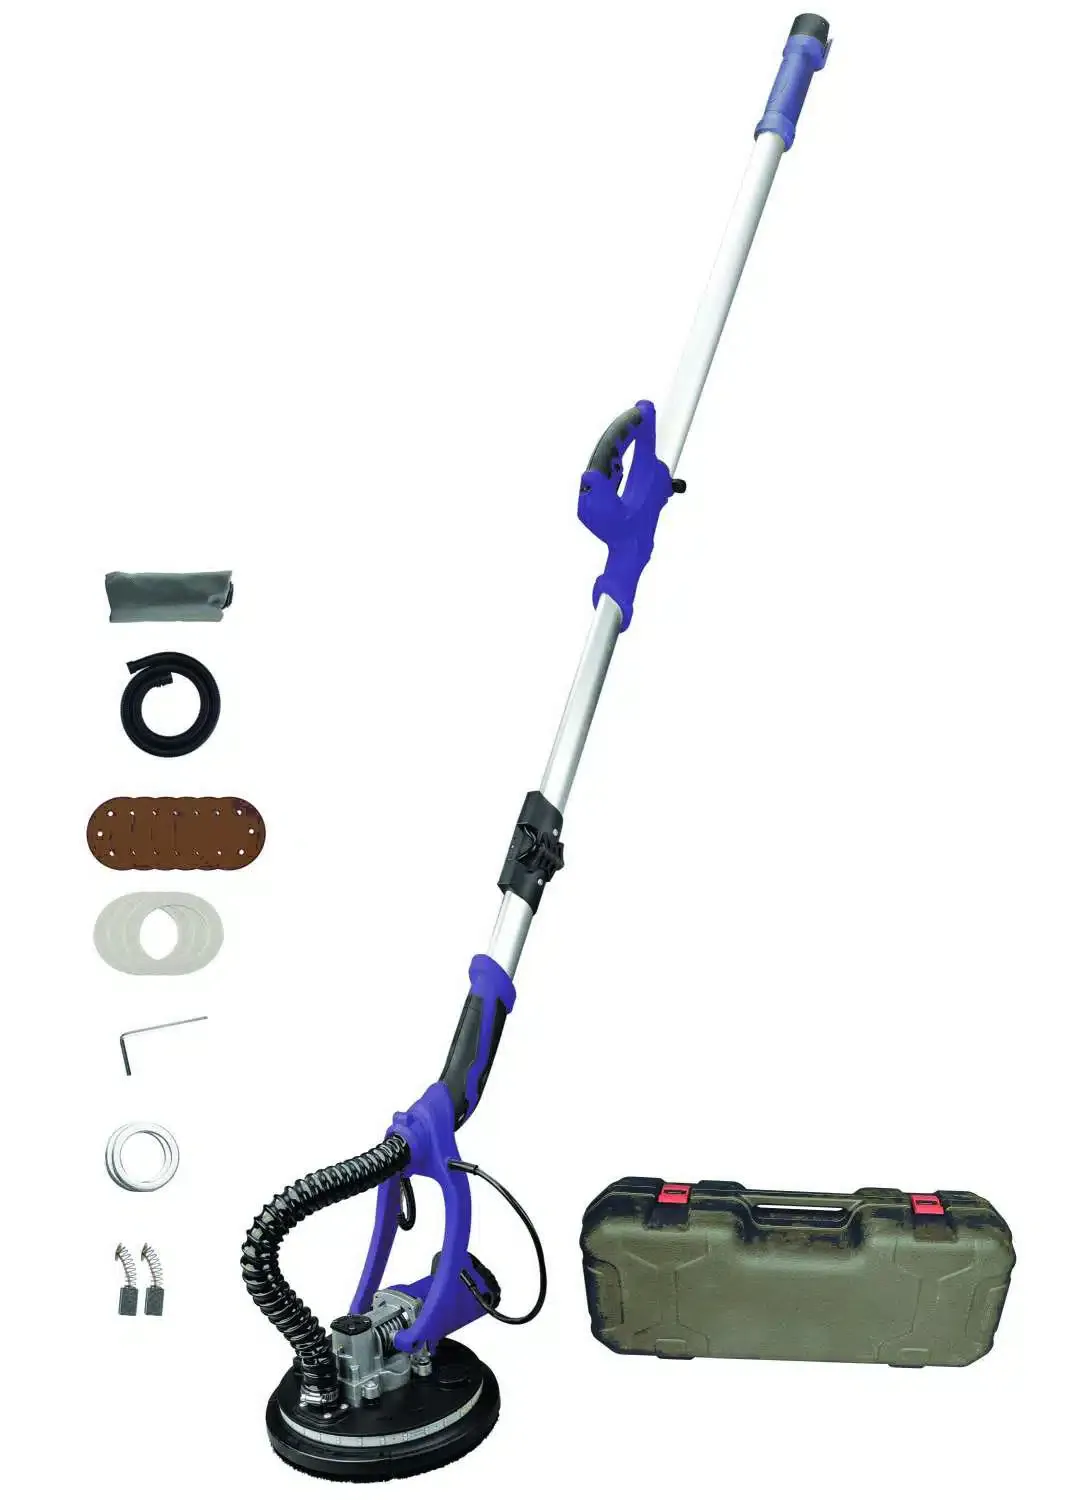 Achieve a Perfect Finish with the 225A-ZD-B Drywall Sander